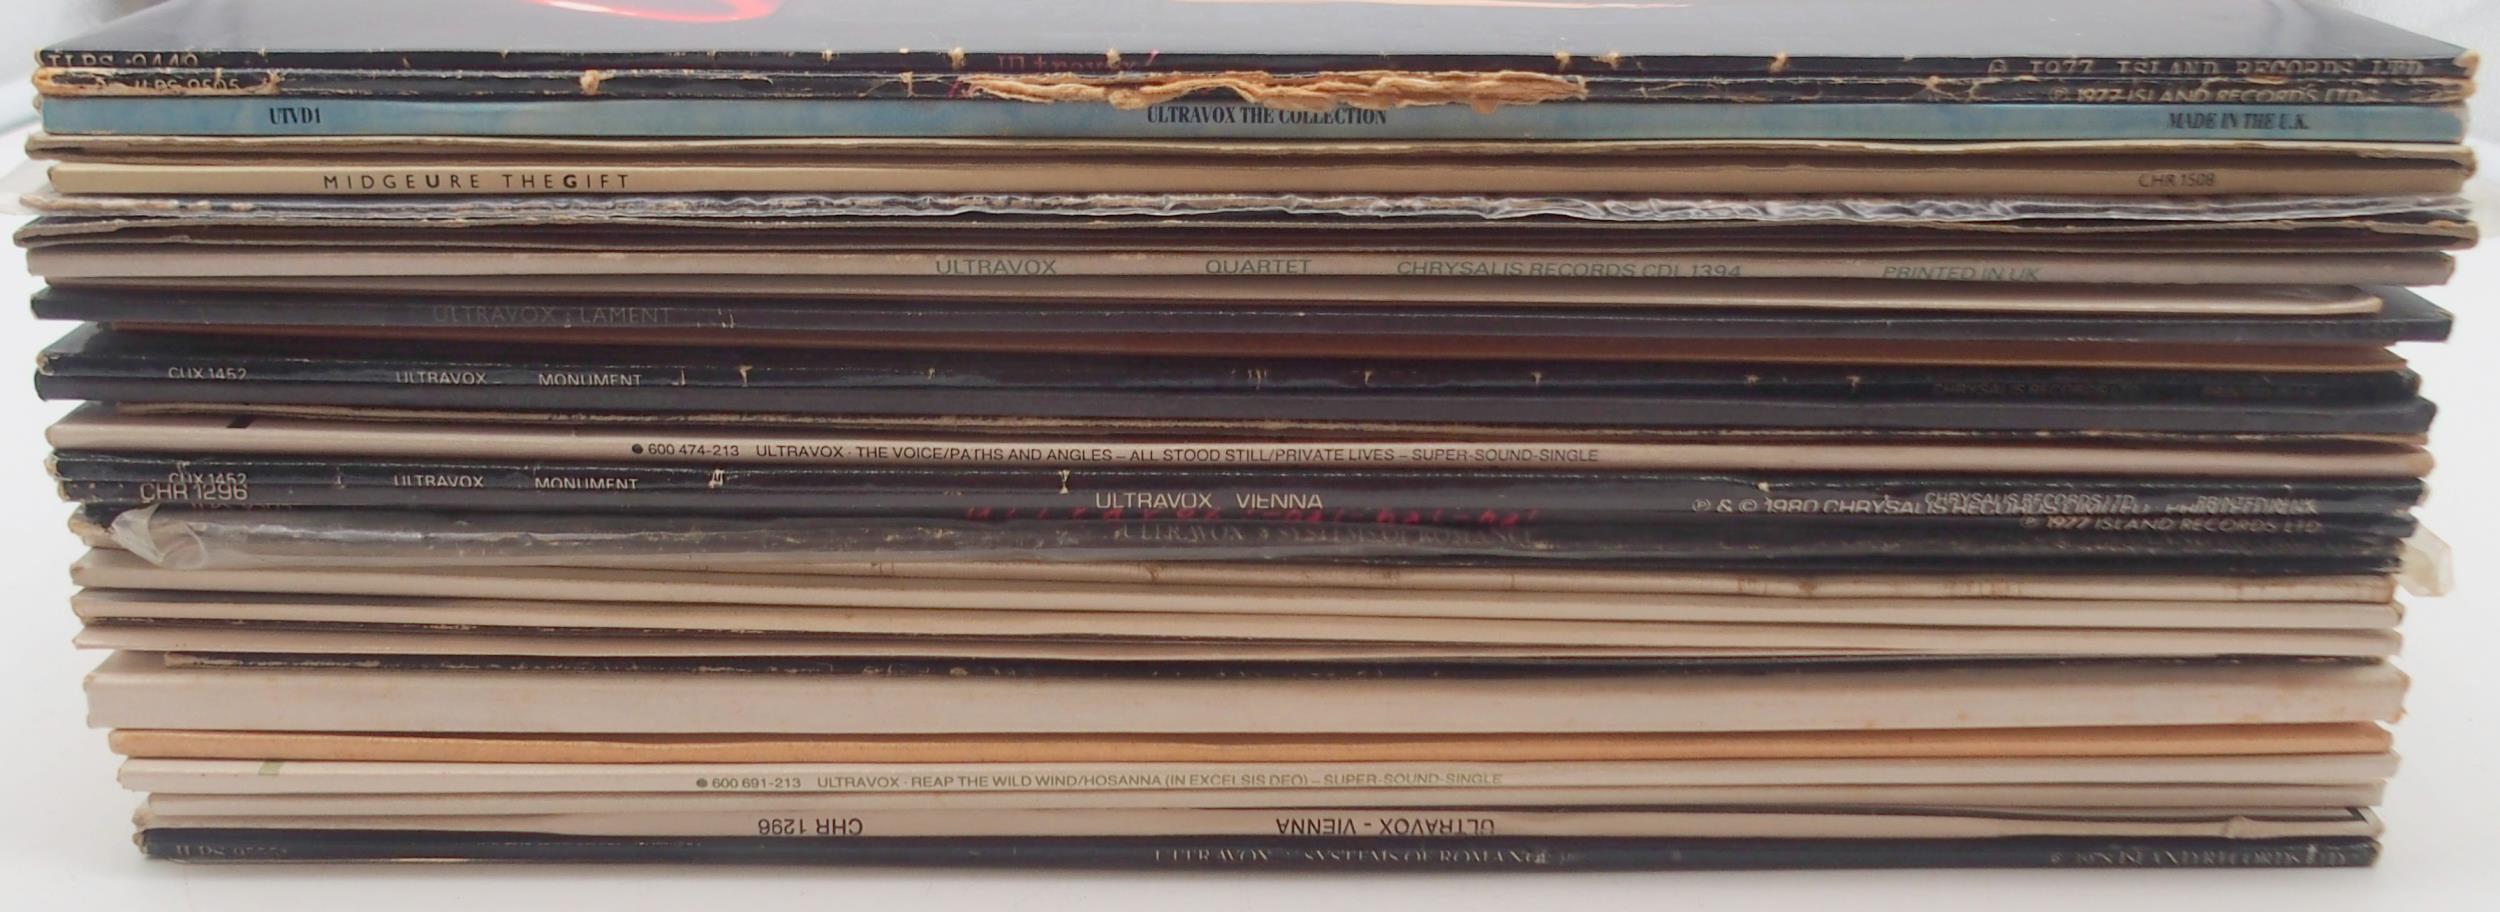 ULTRAXOV a vinyl record collection with LP records, EP records, picture discs and singles to include - Image 5 of 5